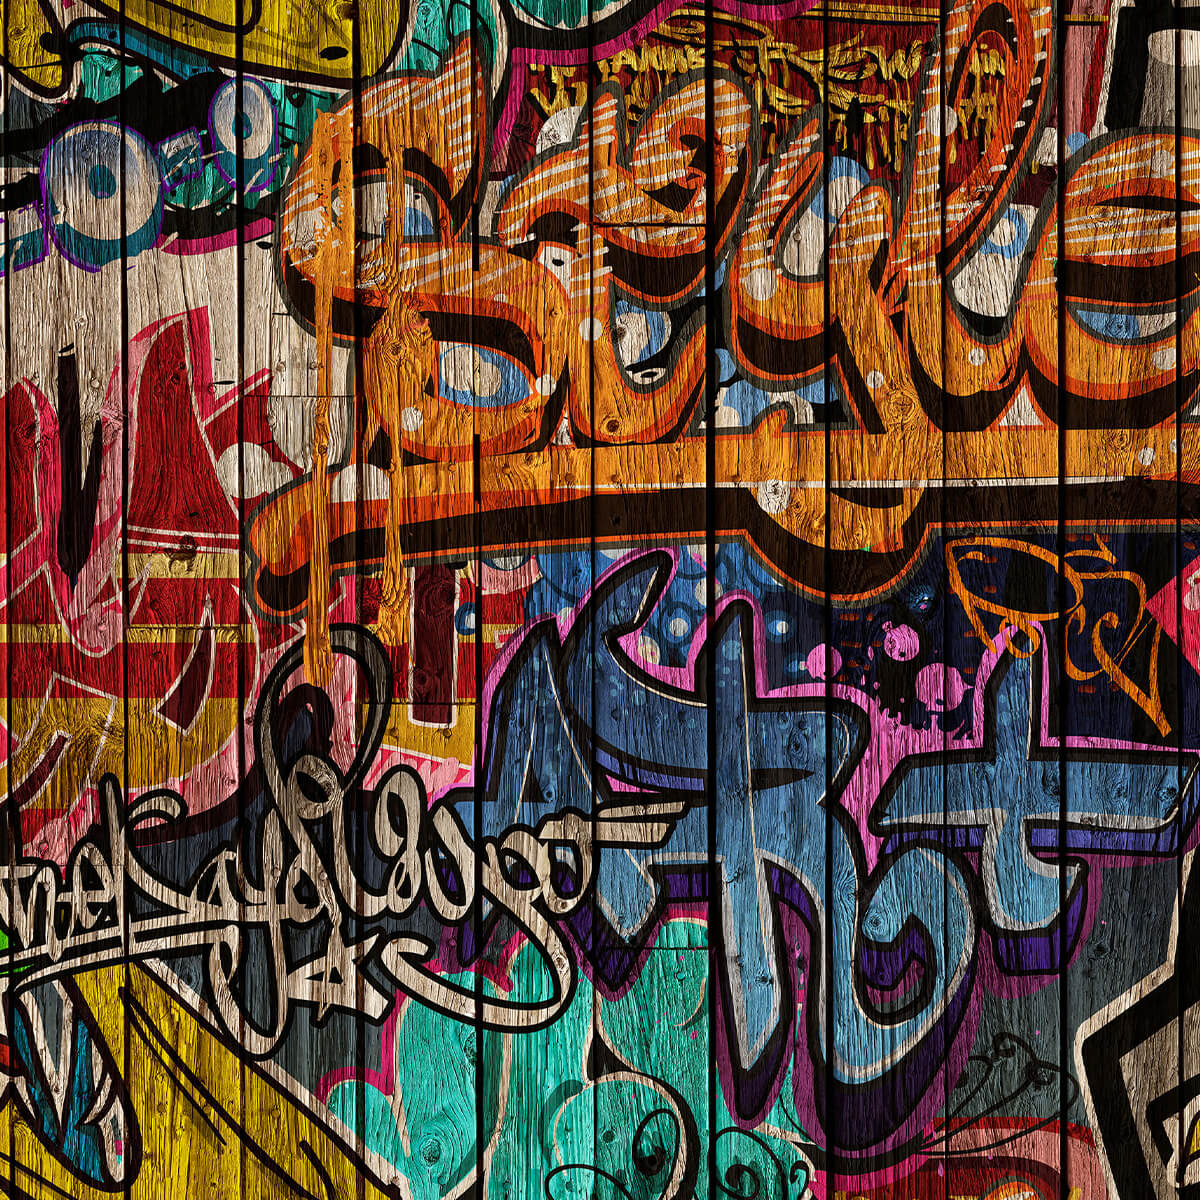 Graffiti with letters on wood